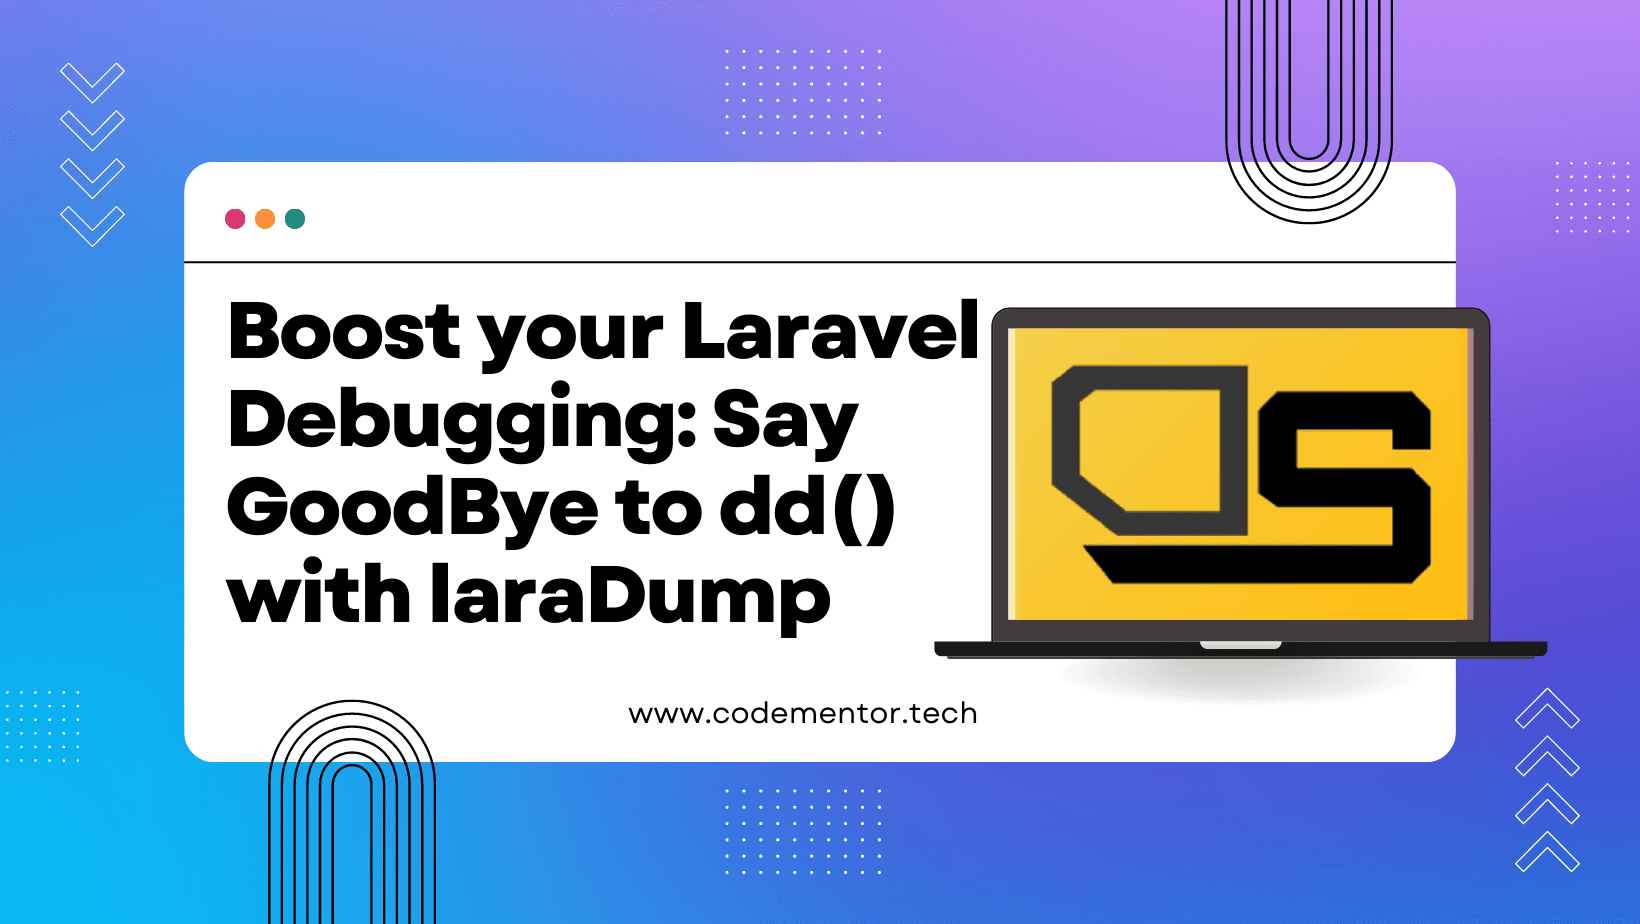 Boost Your Laravel Debugging: Say Goodbye to dd() with LaraDumps - codementor.tech